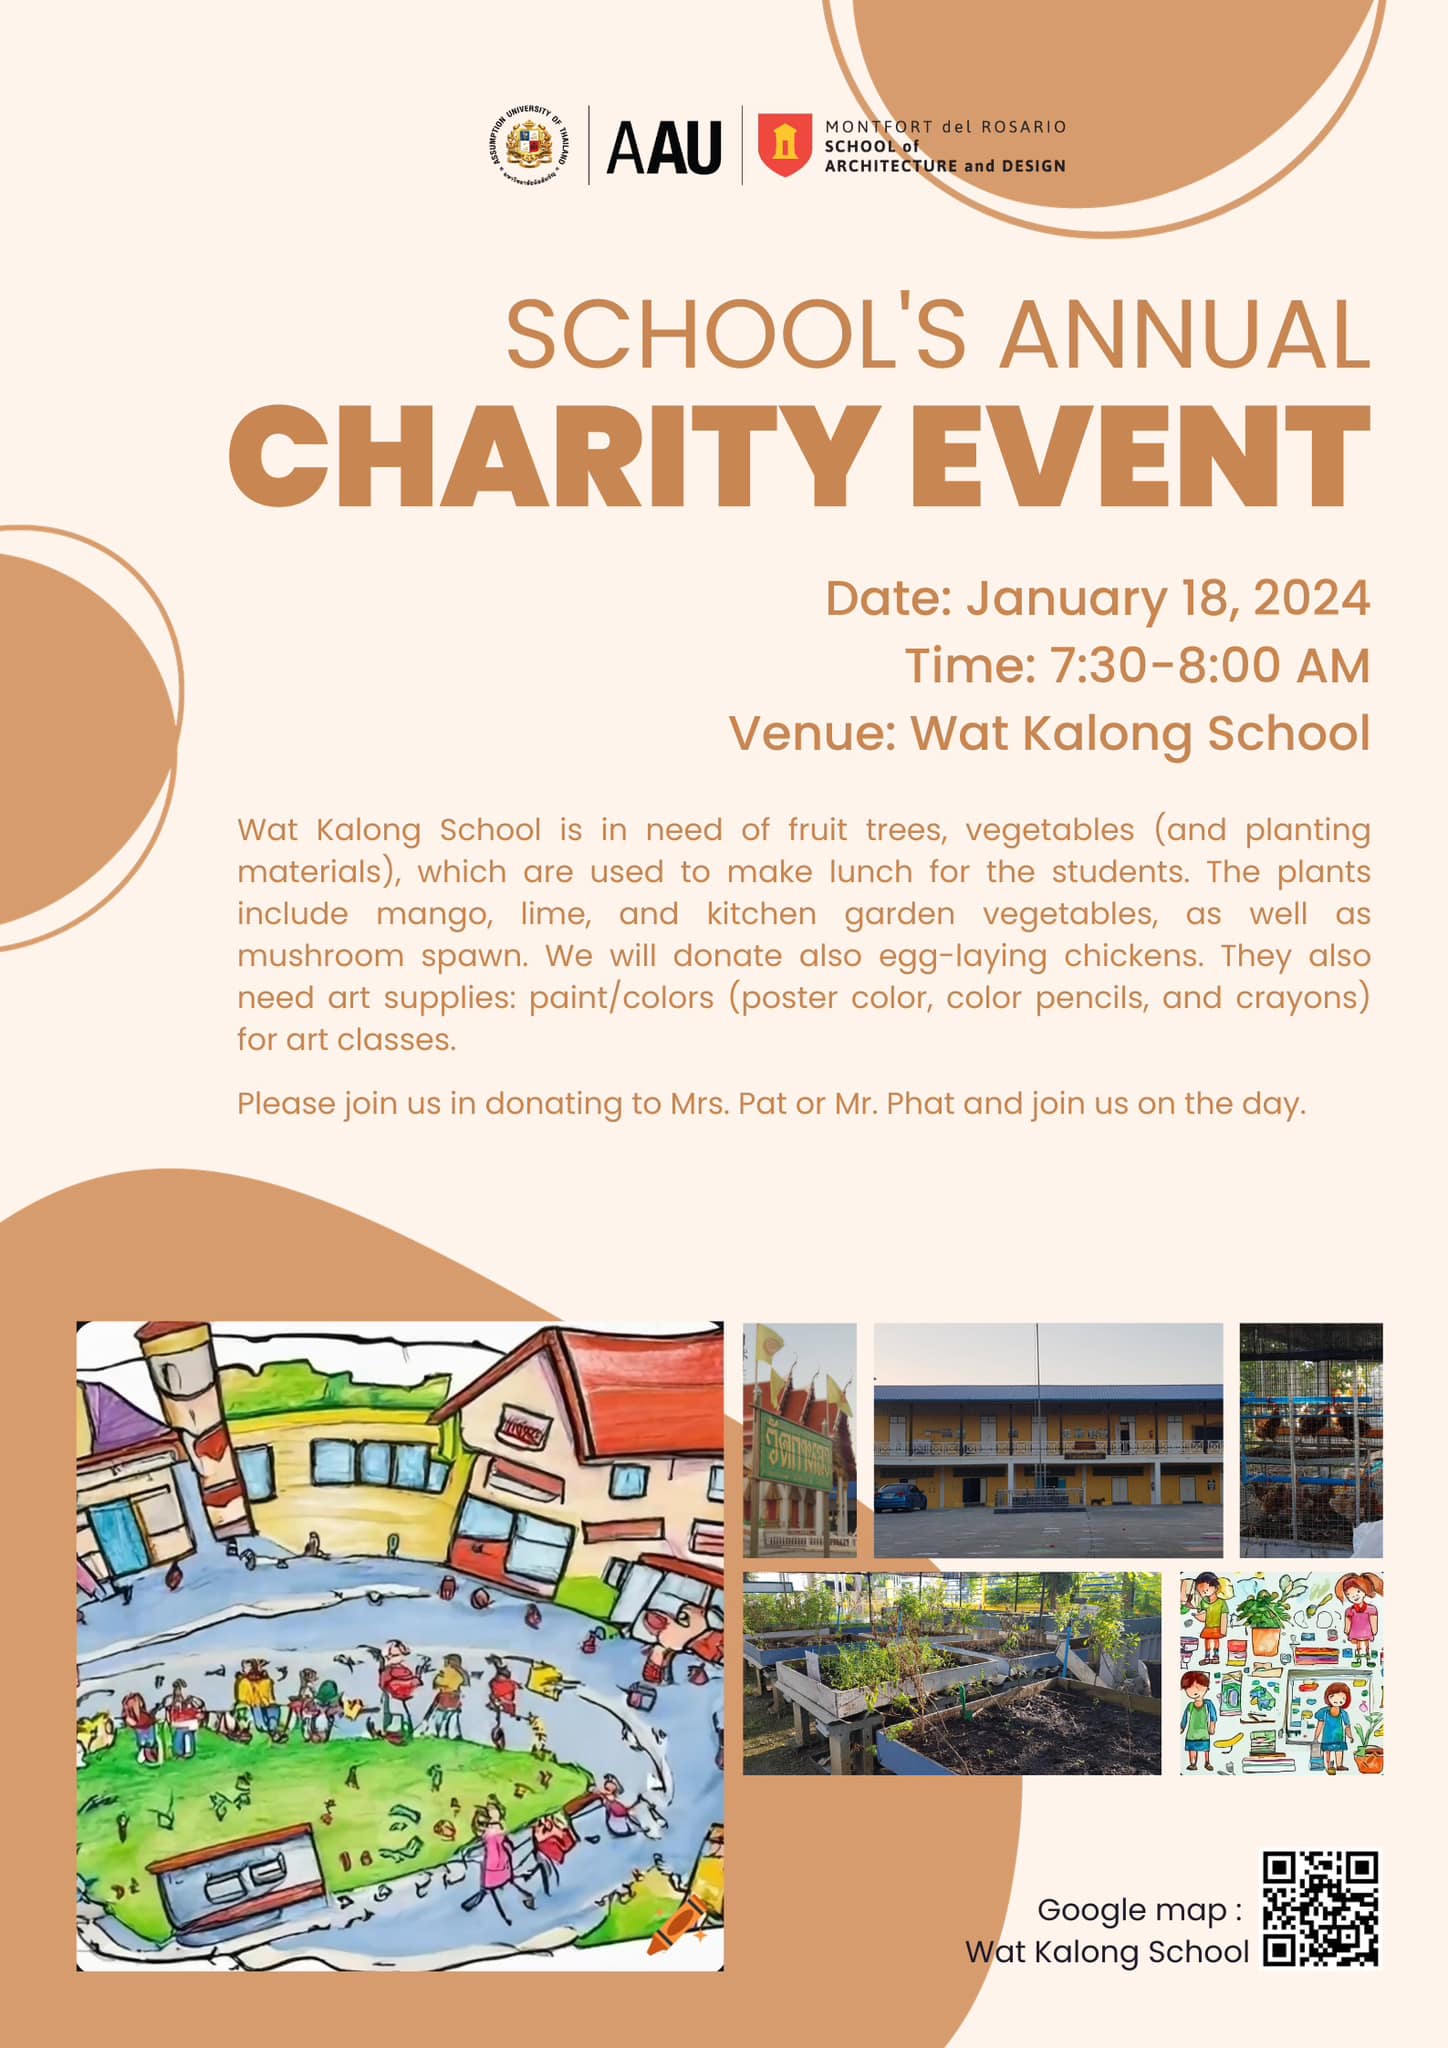 School of Architecture and Design’s Annual Charity Event